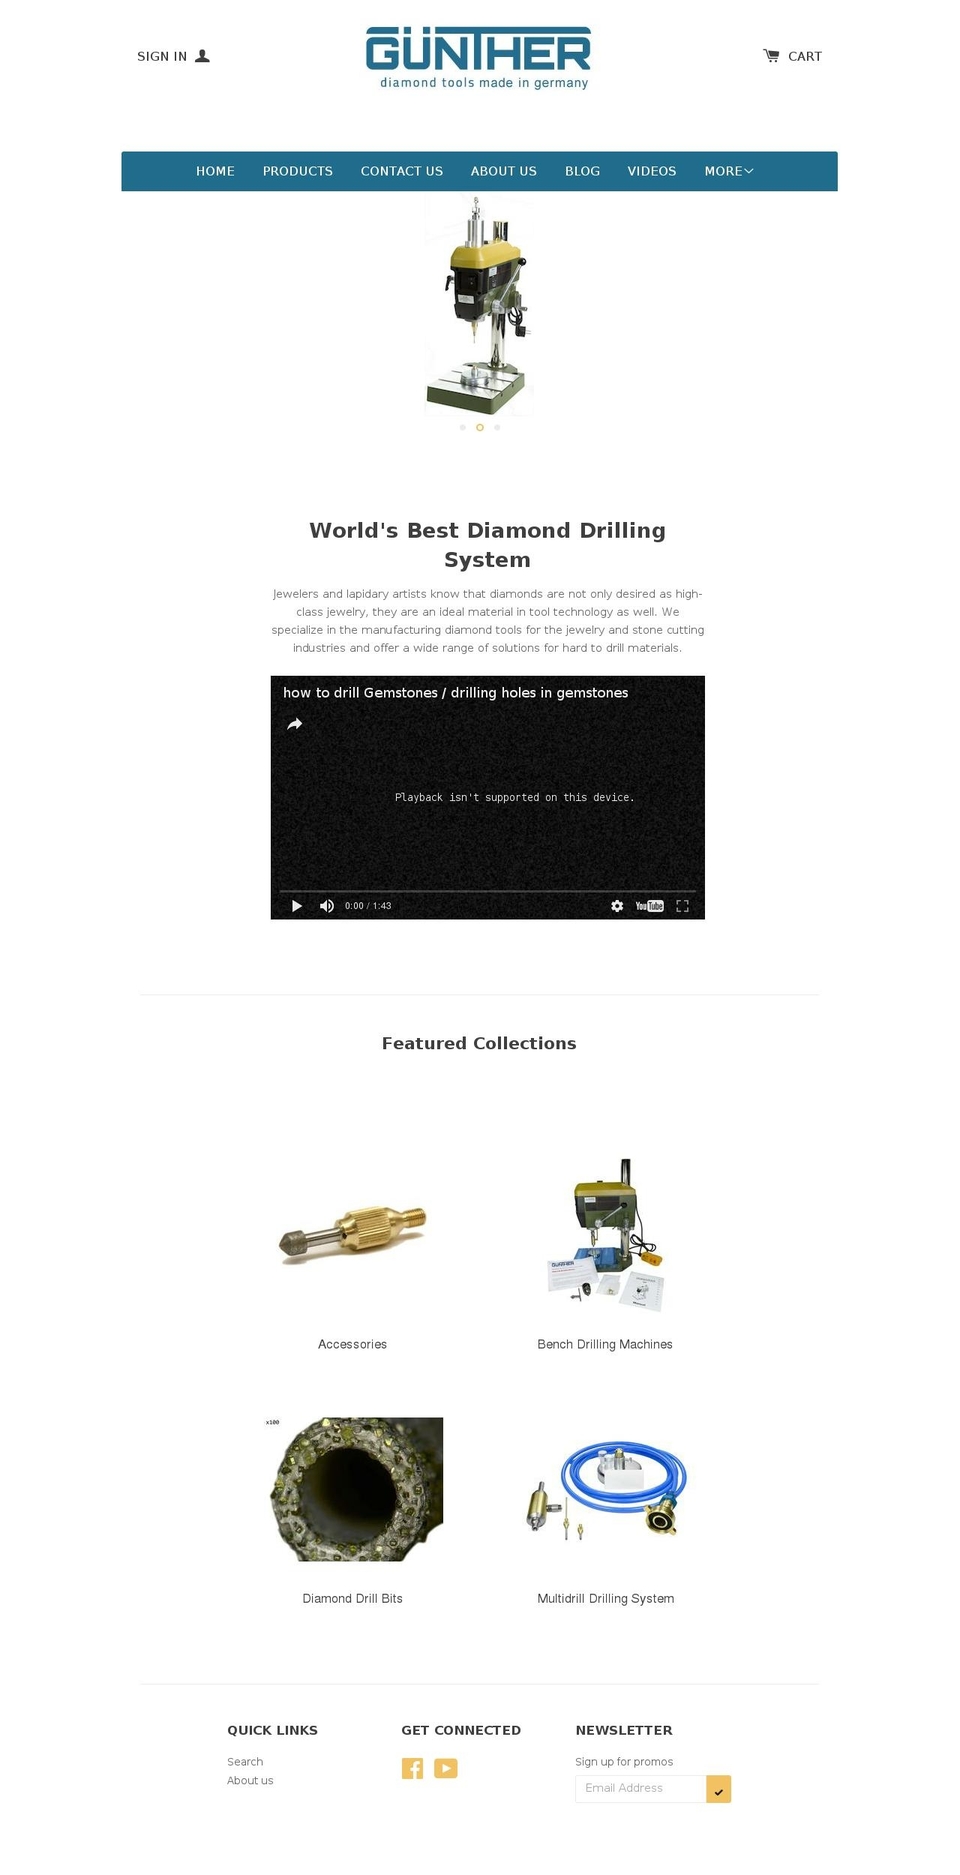 Solo Shopify theme site example diamondtools-guenther.com